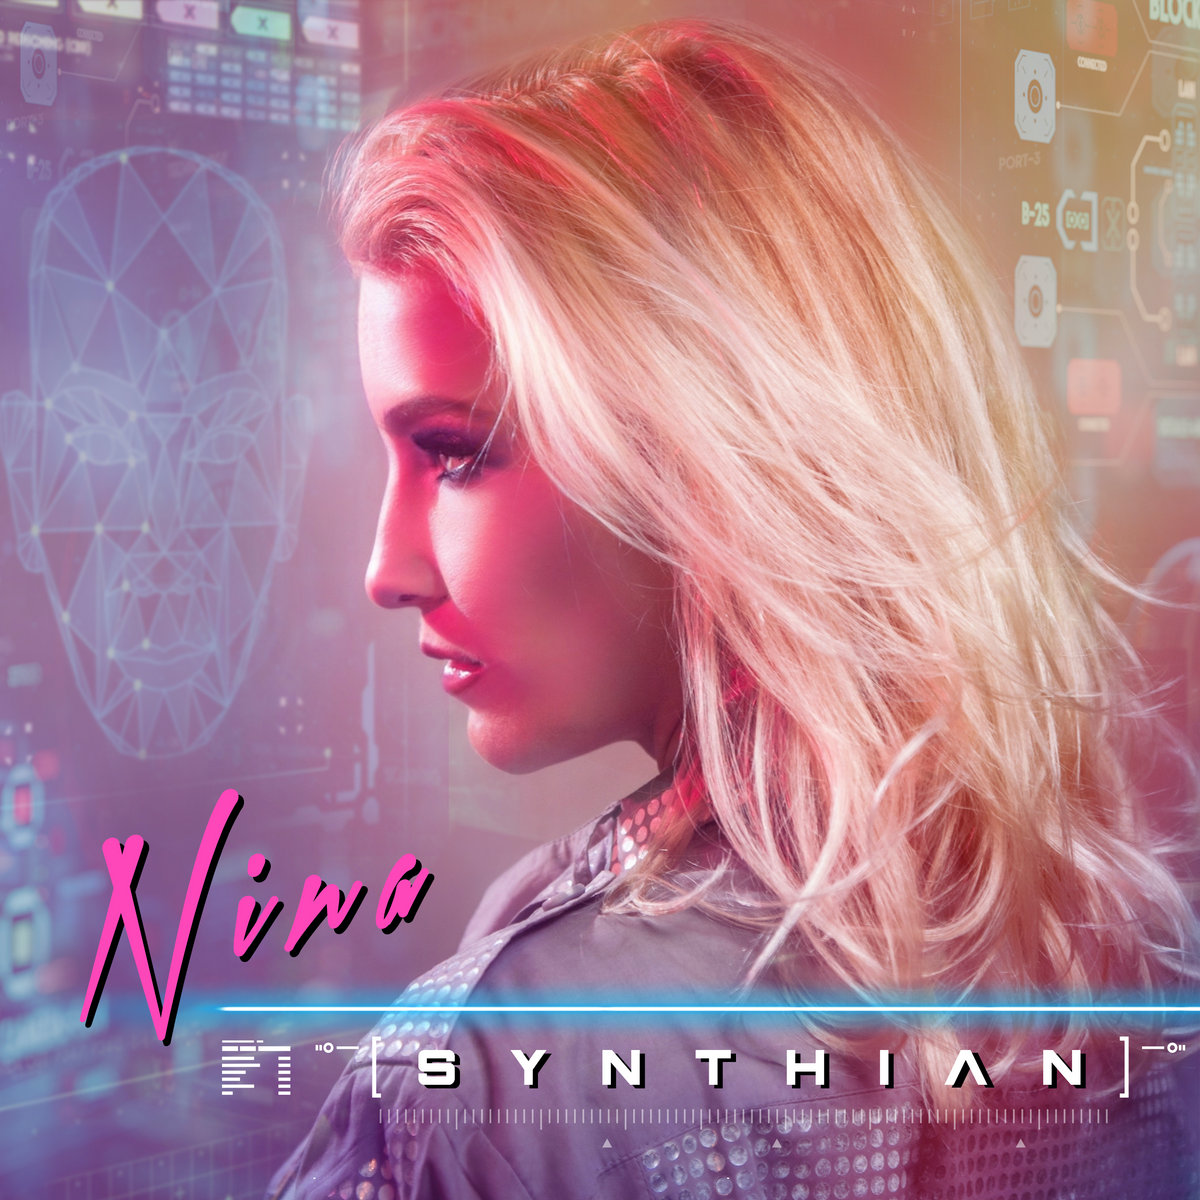 23. Synthian - NINA.I enjoyed her debut album, but this one is even better, IMO. If you're looking for a great female electronic singer to check out, I definitely recommend NINA. Best tracks:Automatic CallRunawayNever EnoughThe Wire @iloveninamusic